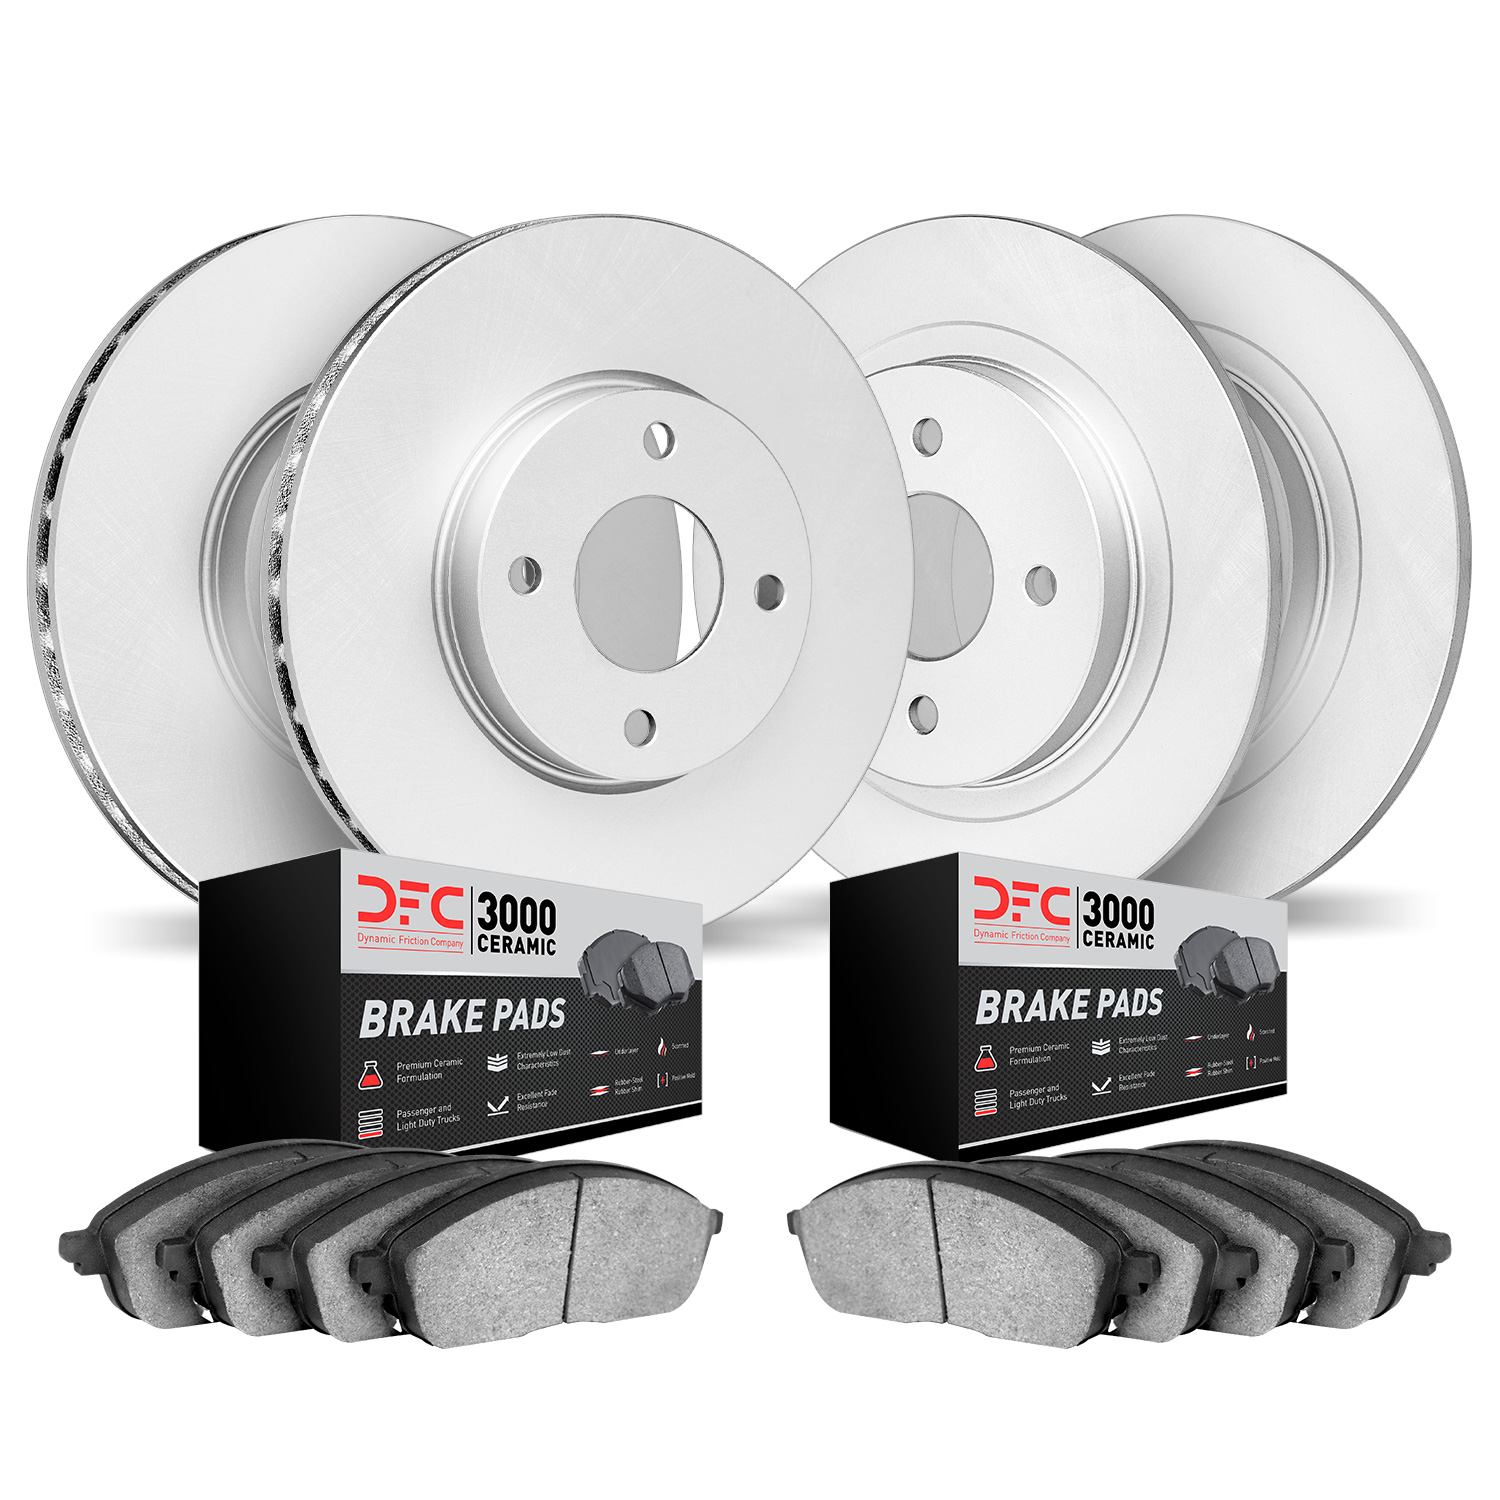 4304-80018 Geospec Brake Rotors with 3000-Series Ceramic Brake Pads Kit, Fits Select Multiple Makes/Models, Position: Front and